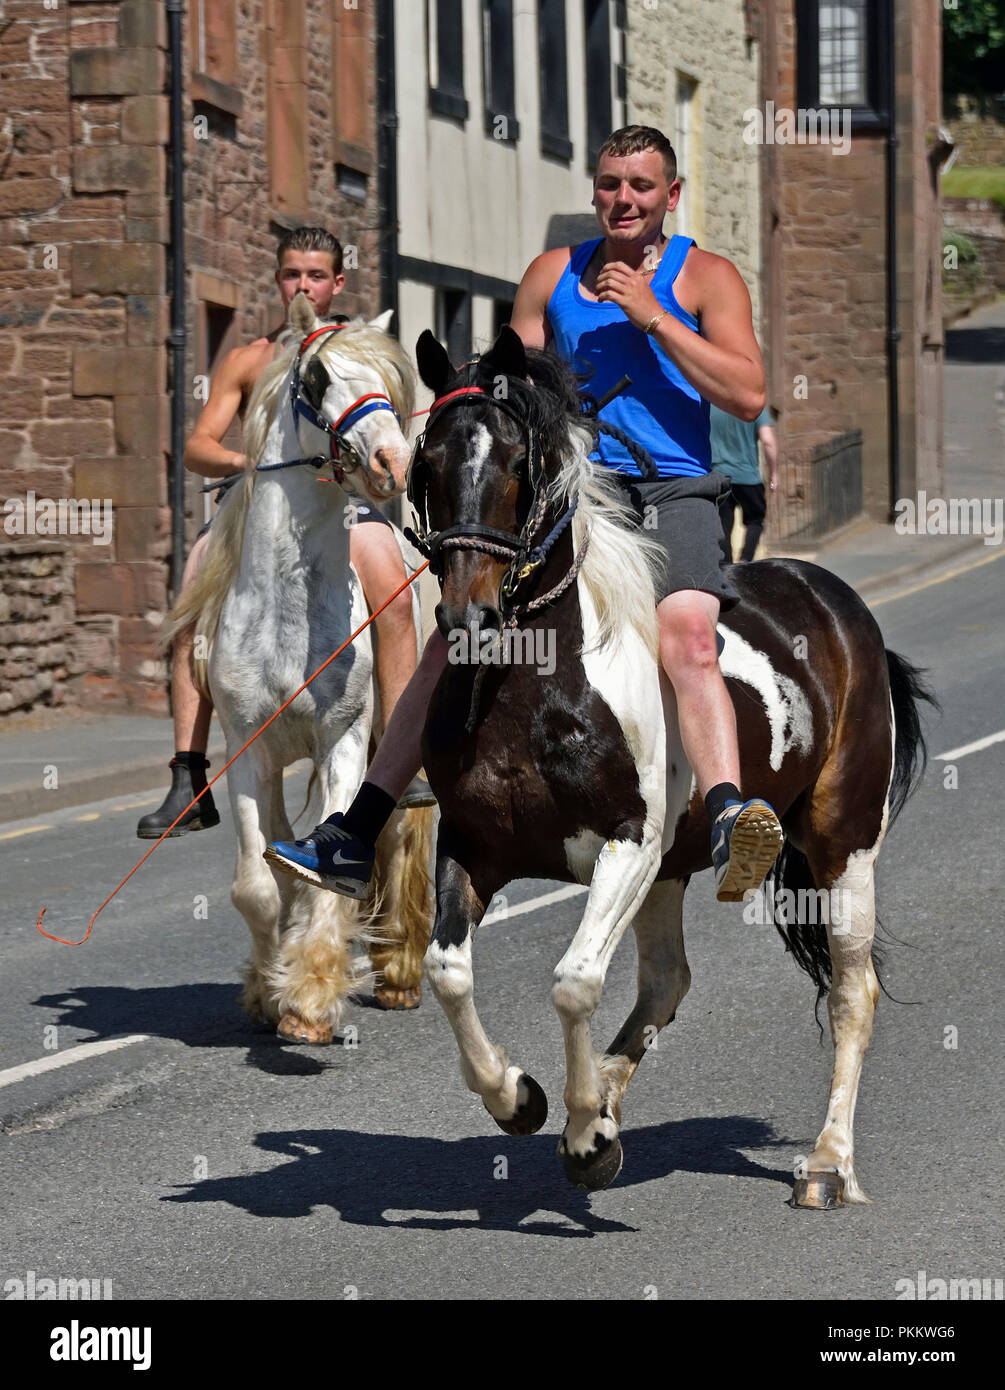 Two Gypsy Travellers riding horses at Appleby Horse Fair 2018. The Sands, Appleby-in-Westmorland, Cumbria, England, United Kingdom, Europe. Stock Photo